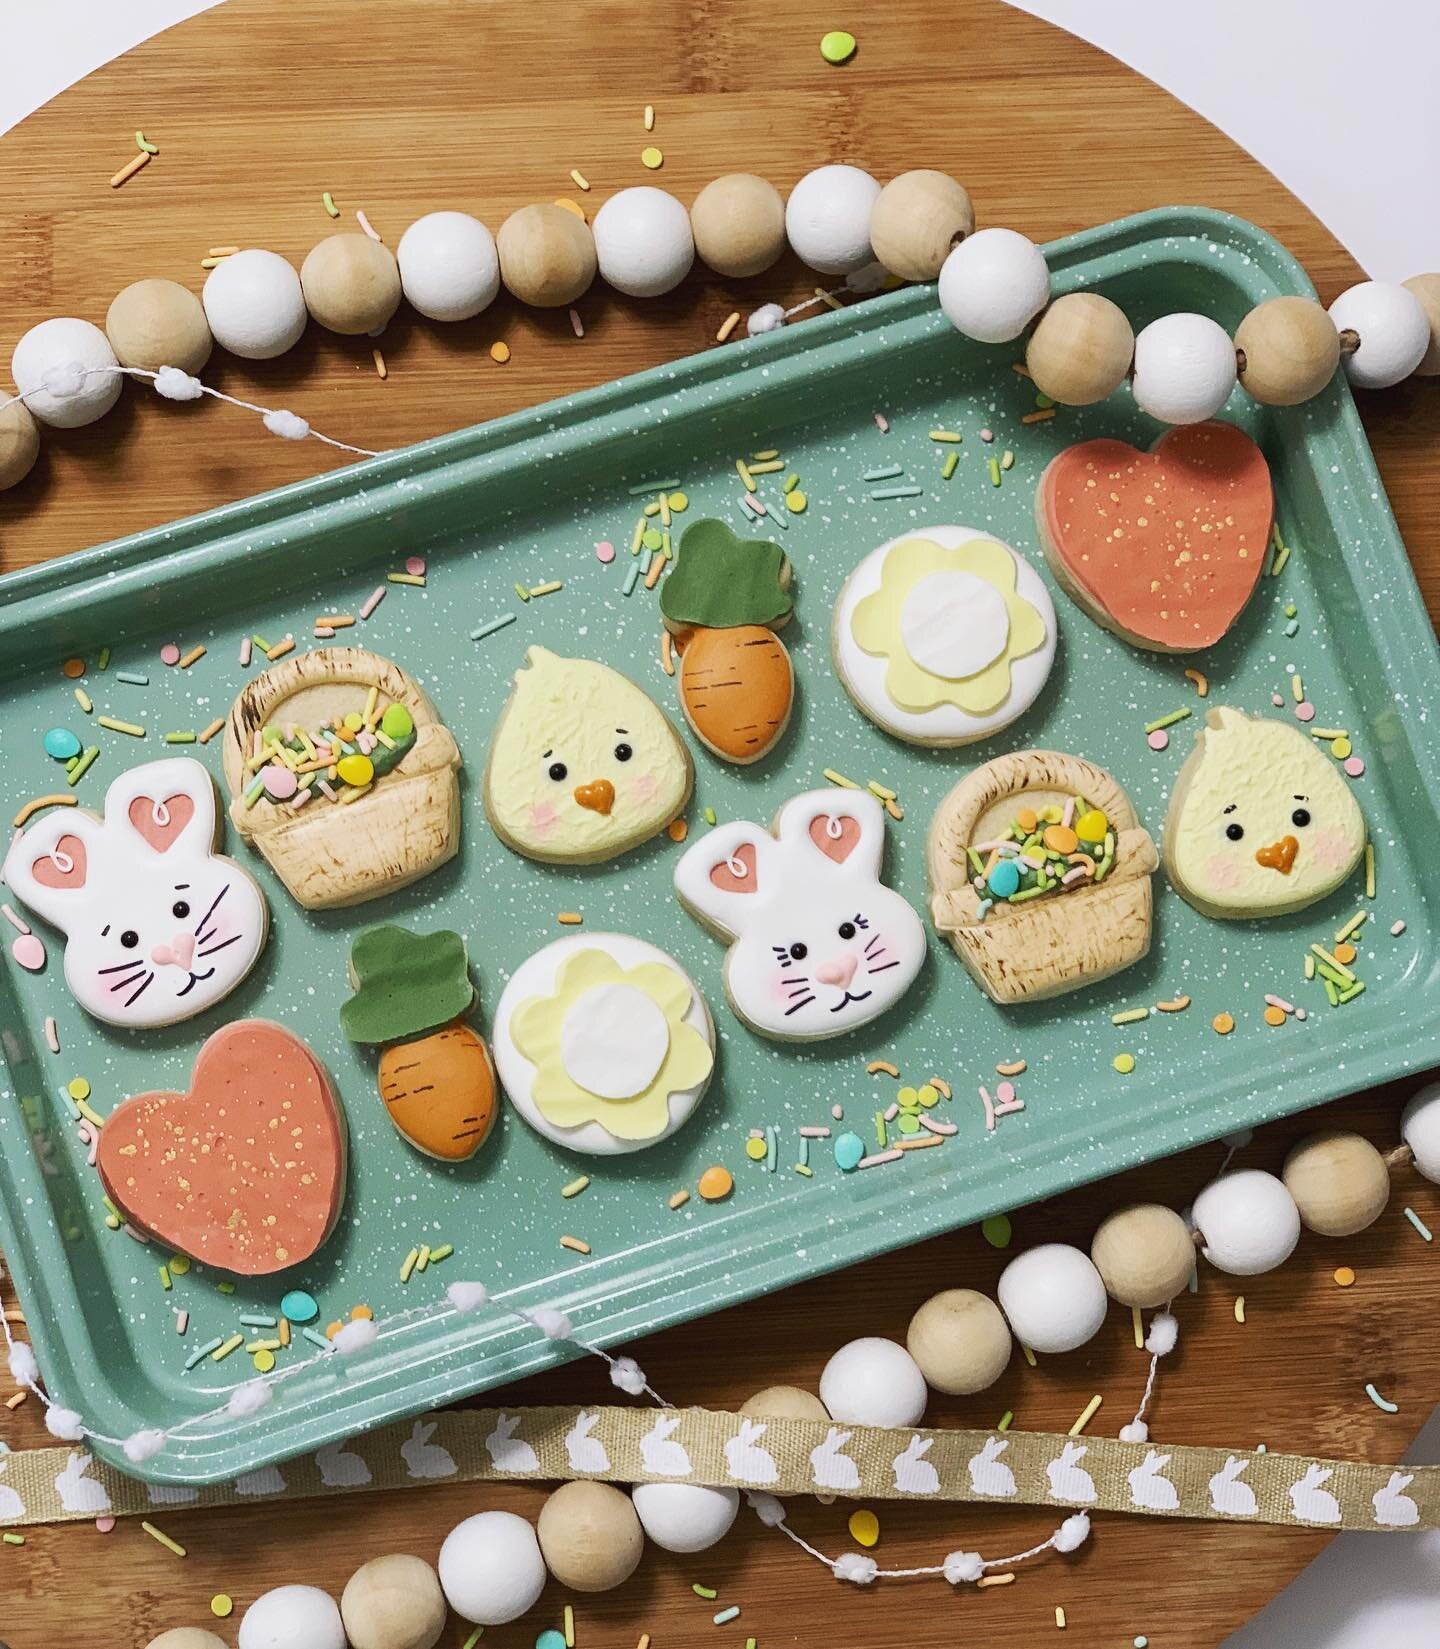 Easter cookie preorder is NOW open!

All Easter options/sets are now listed and available to preorder on my website under Shop (LINK IN BIO). Preorder will close Wednesday 3/29.

Porch pickup will be Friday 4/7 from 9AM-6:30PM. Locals only, I am loca